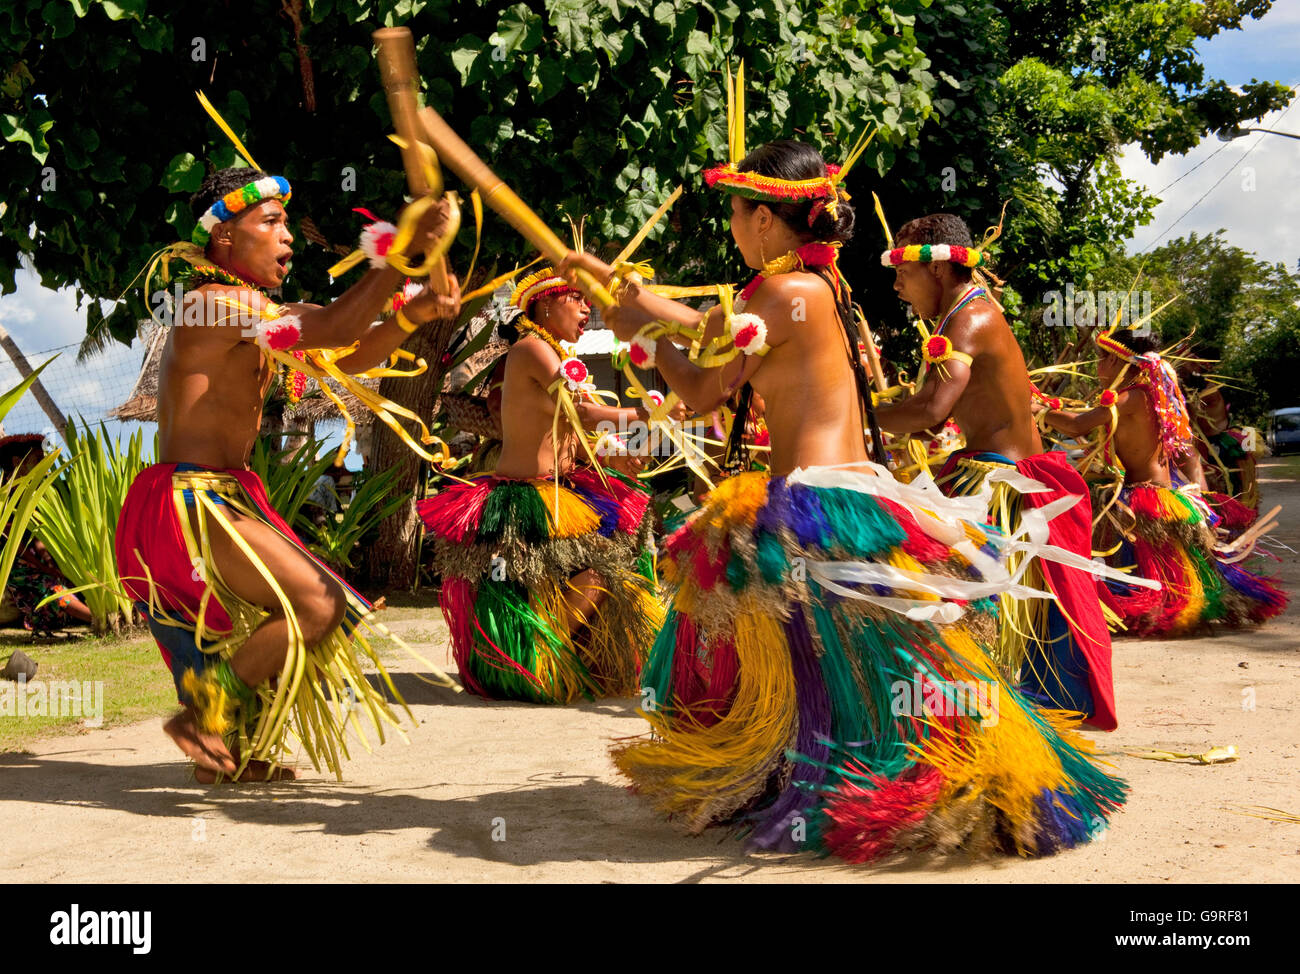 Traditional bamboo dance, Yap Island, Yap Islands, Federated States of Micronesia Stock Photo